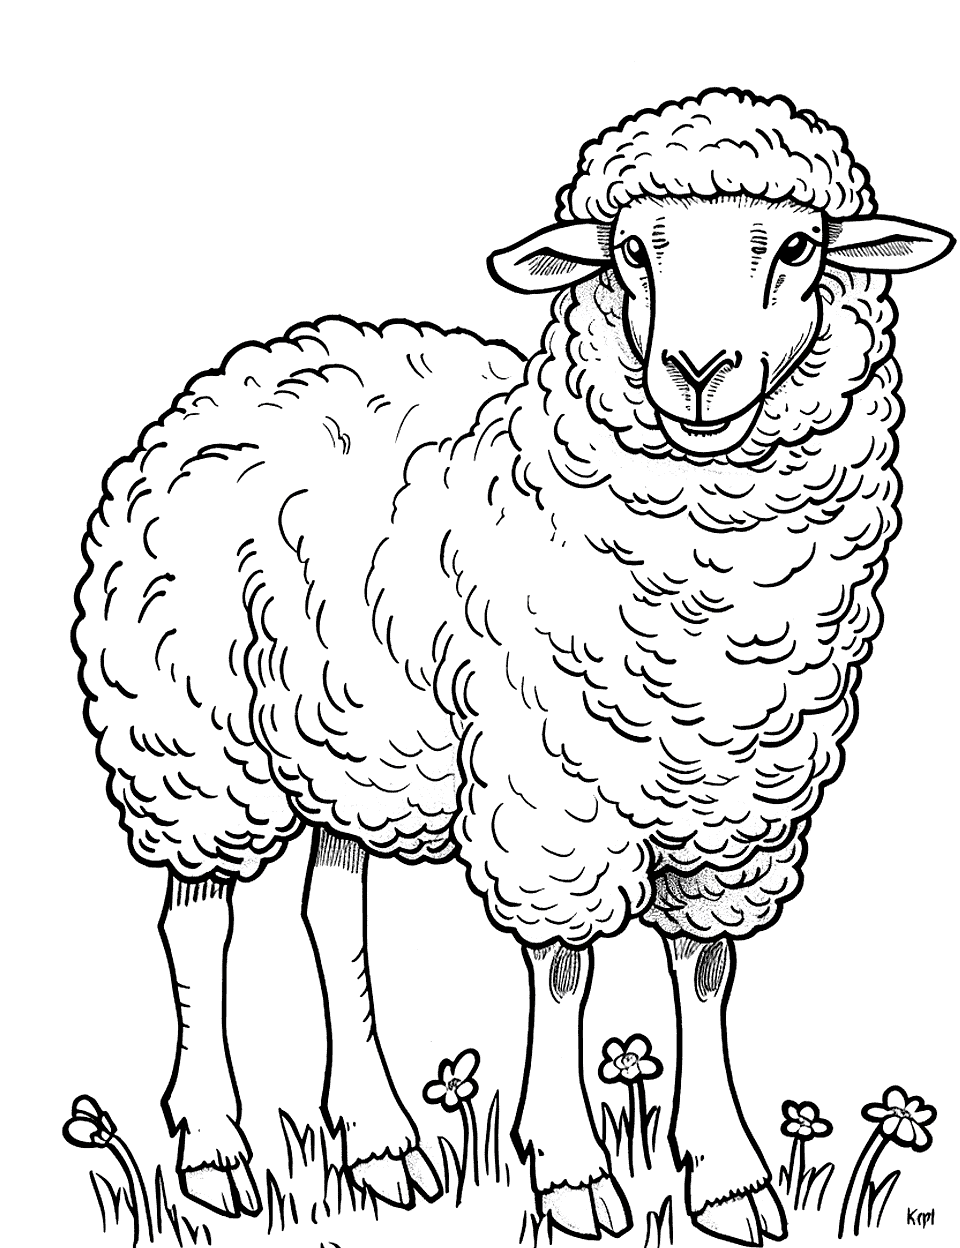 Woolly Sheep Getting Sheared Coloring Page - A sheep standing still after being gently sheared by a farmer.